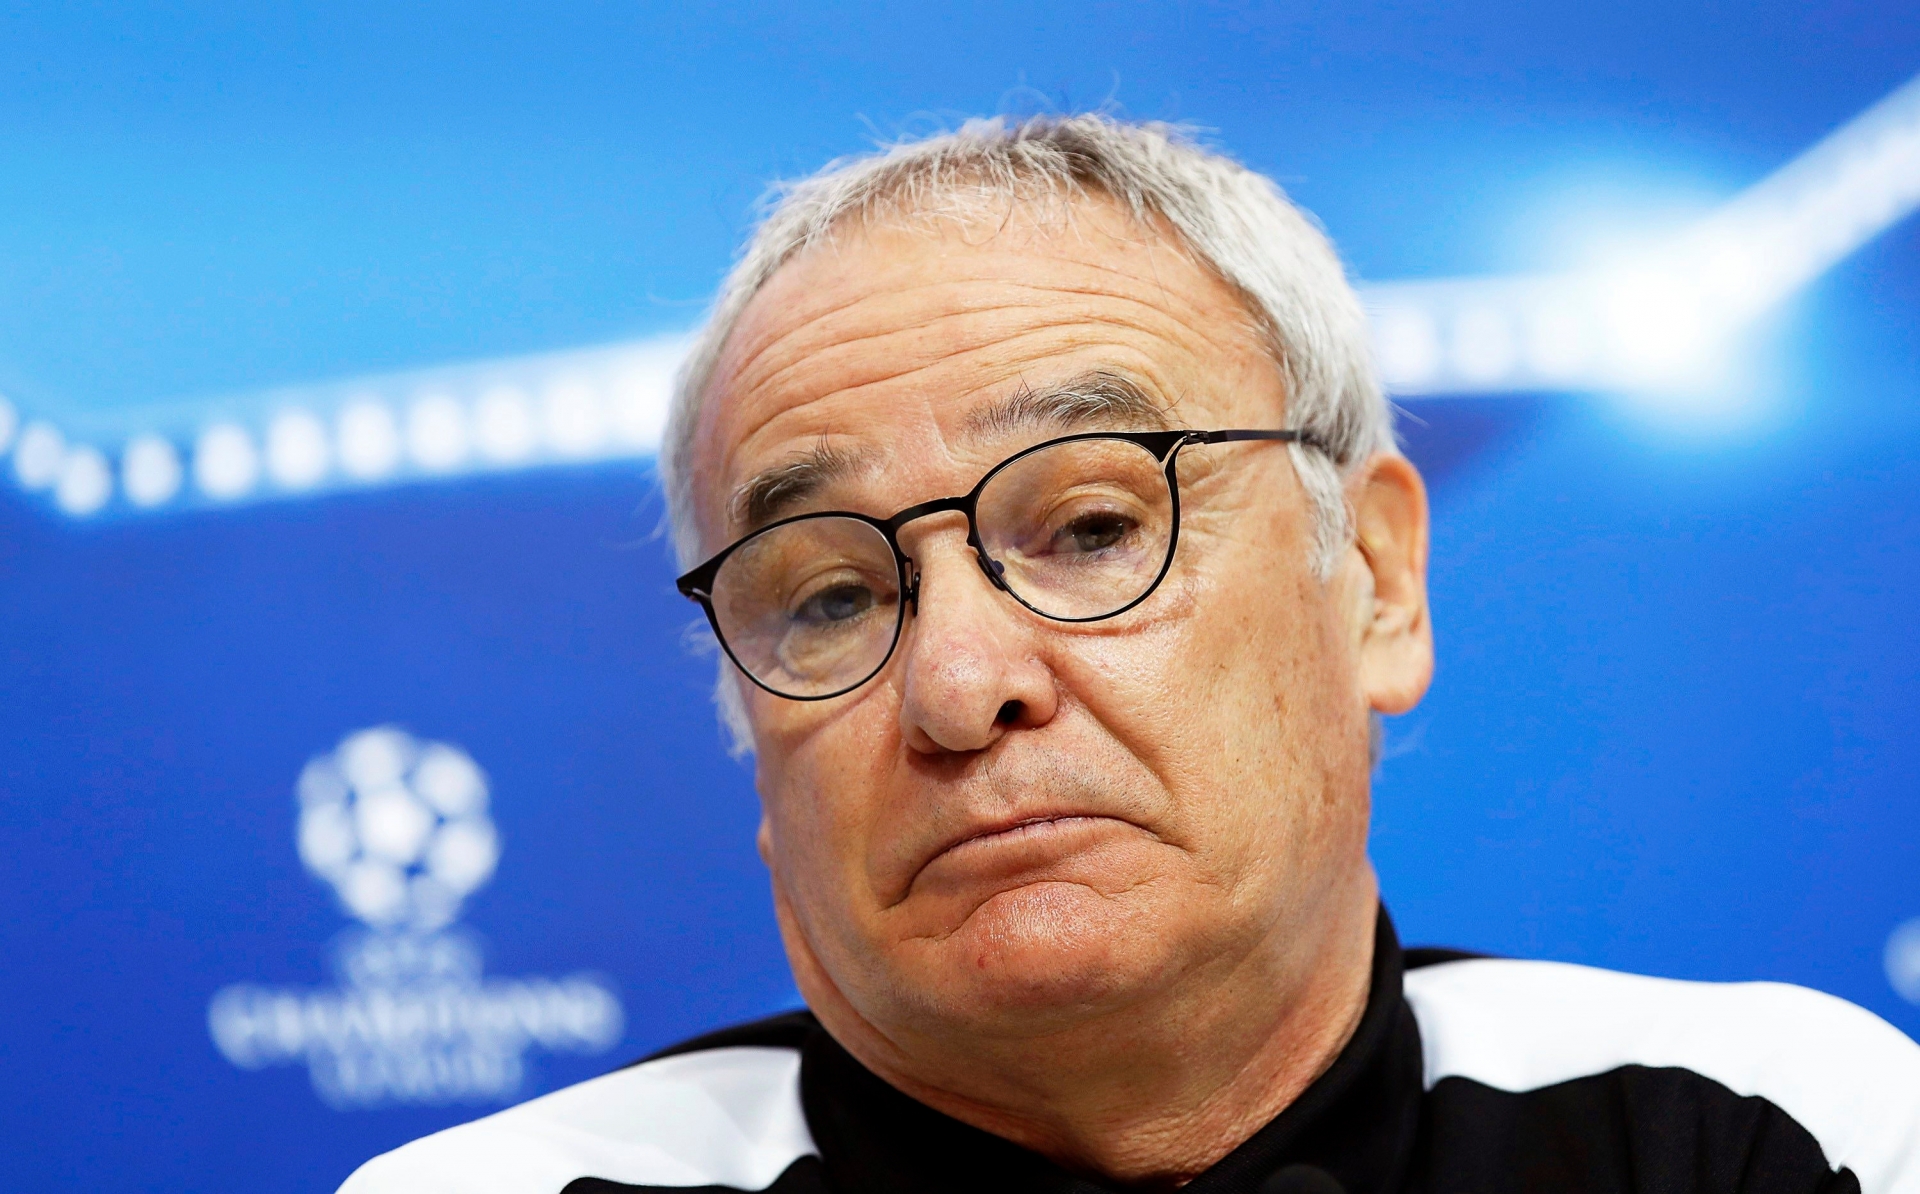 epa05807275 Leicester City's manager Claudio Ranieri reacts during a press conference at the Sanchez Pizjuan stadium in Seville, southern Spain, 21 February 2016. Leicester City will face Sevilla FC in the UEFA Champions League round of 16, first leg soccer match on 22 February 2017.  EPA/JULIO MUNOZ SPAIN SOCCER UEFA CHAMPIONS LEAGUE